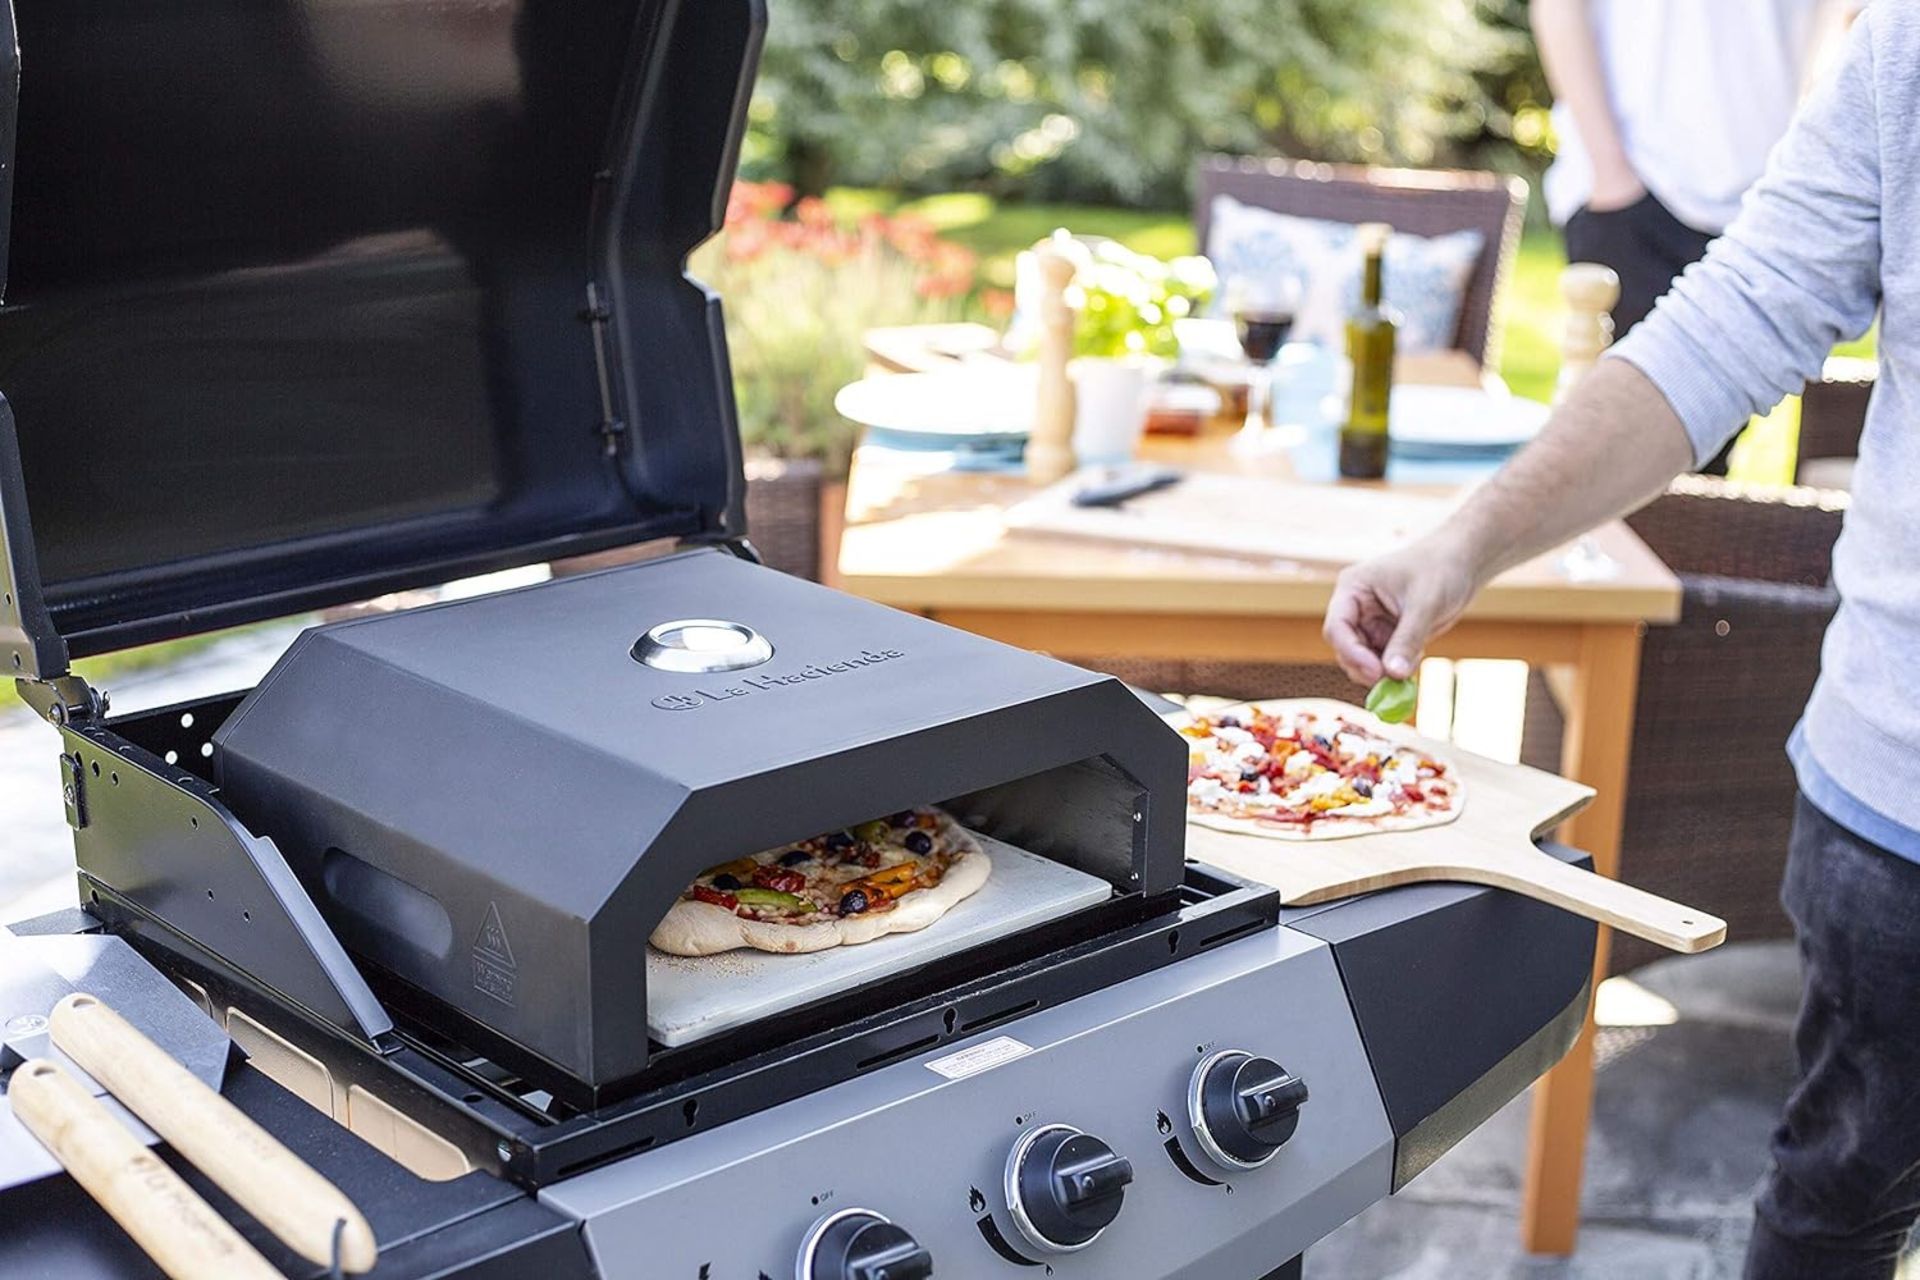 BRAND NEW LA HACIENDA Pizza Oven for Barbecues. RRP £99.99 EACH. The revolutionary BBQ Pizza Oven is - Image 3 of 3